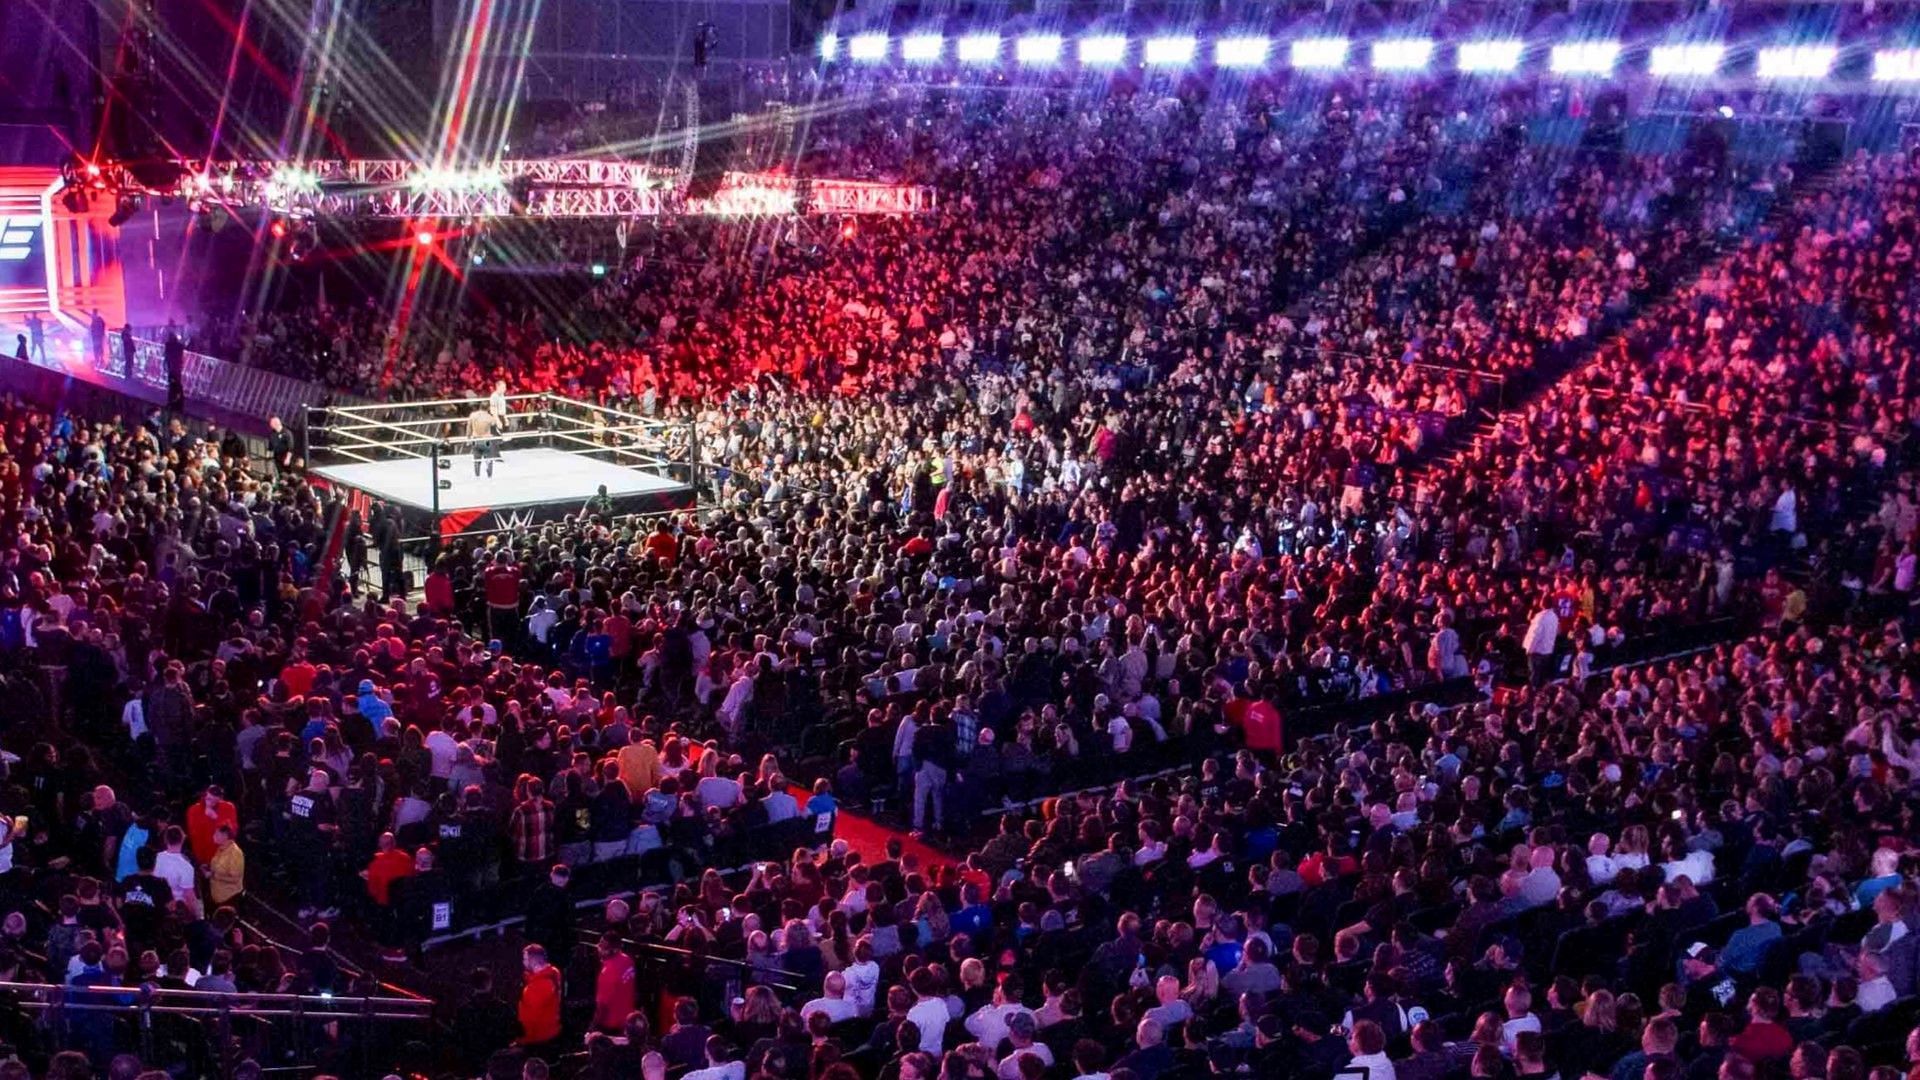 The WWE Universe packs the arena in London